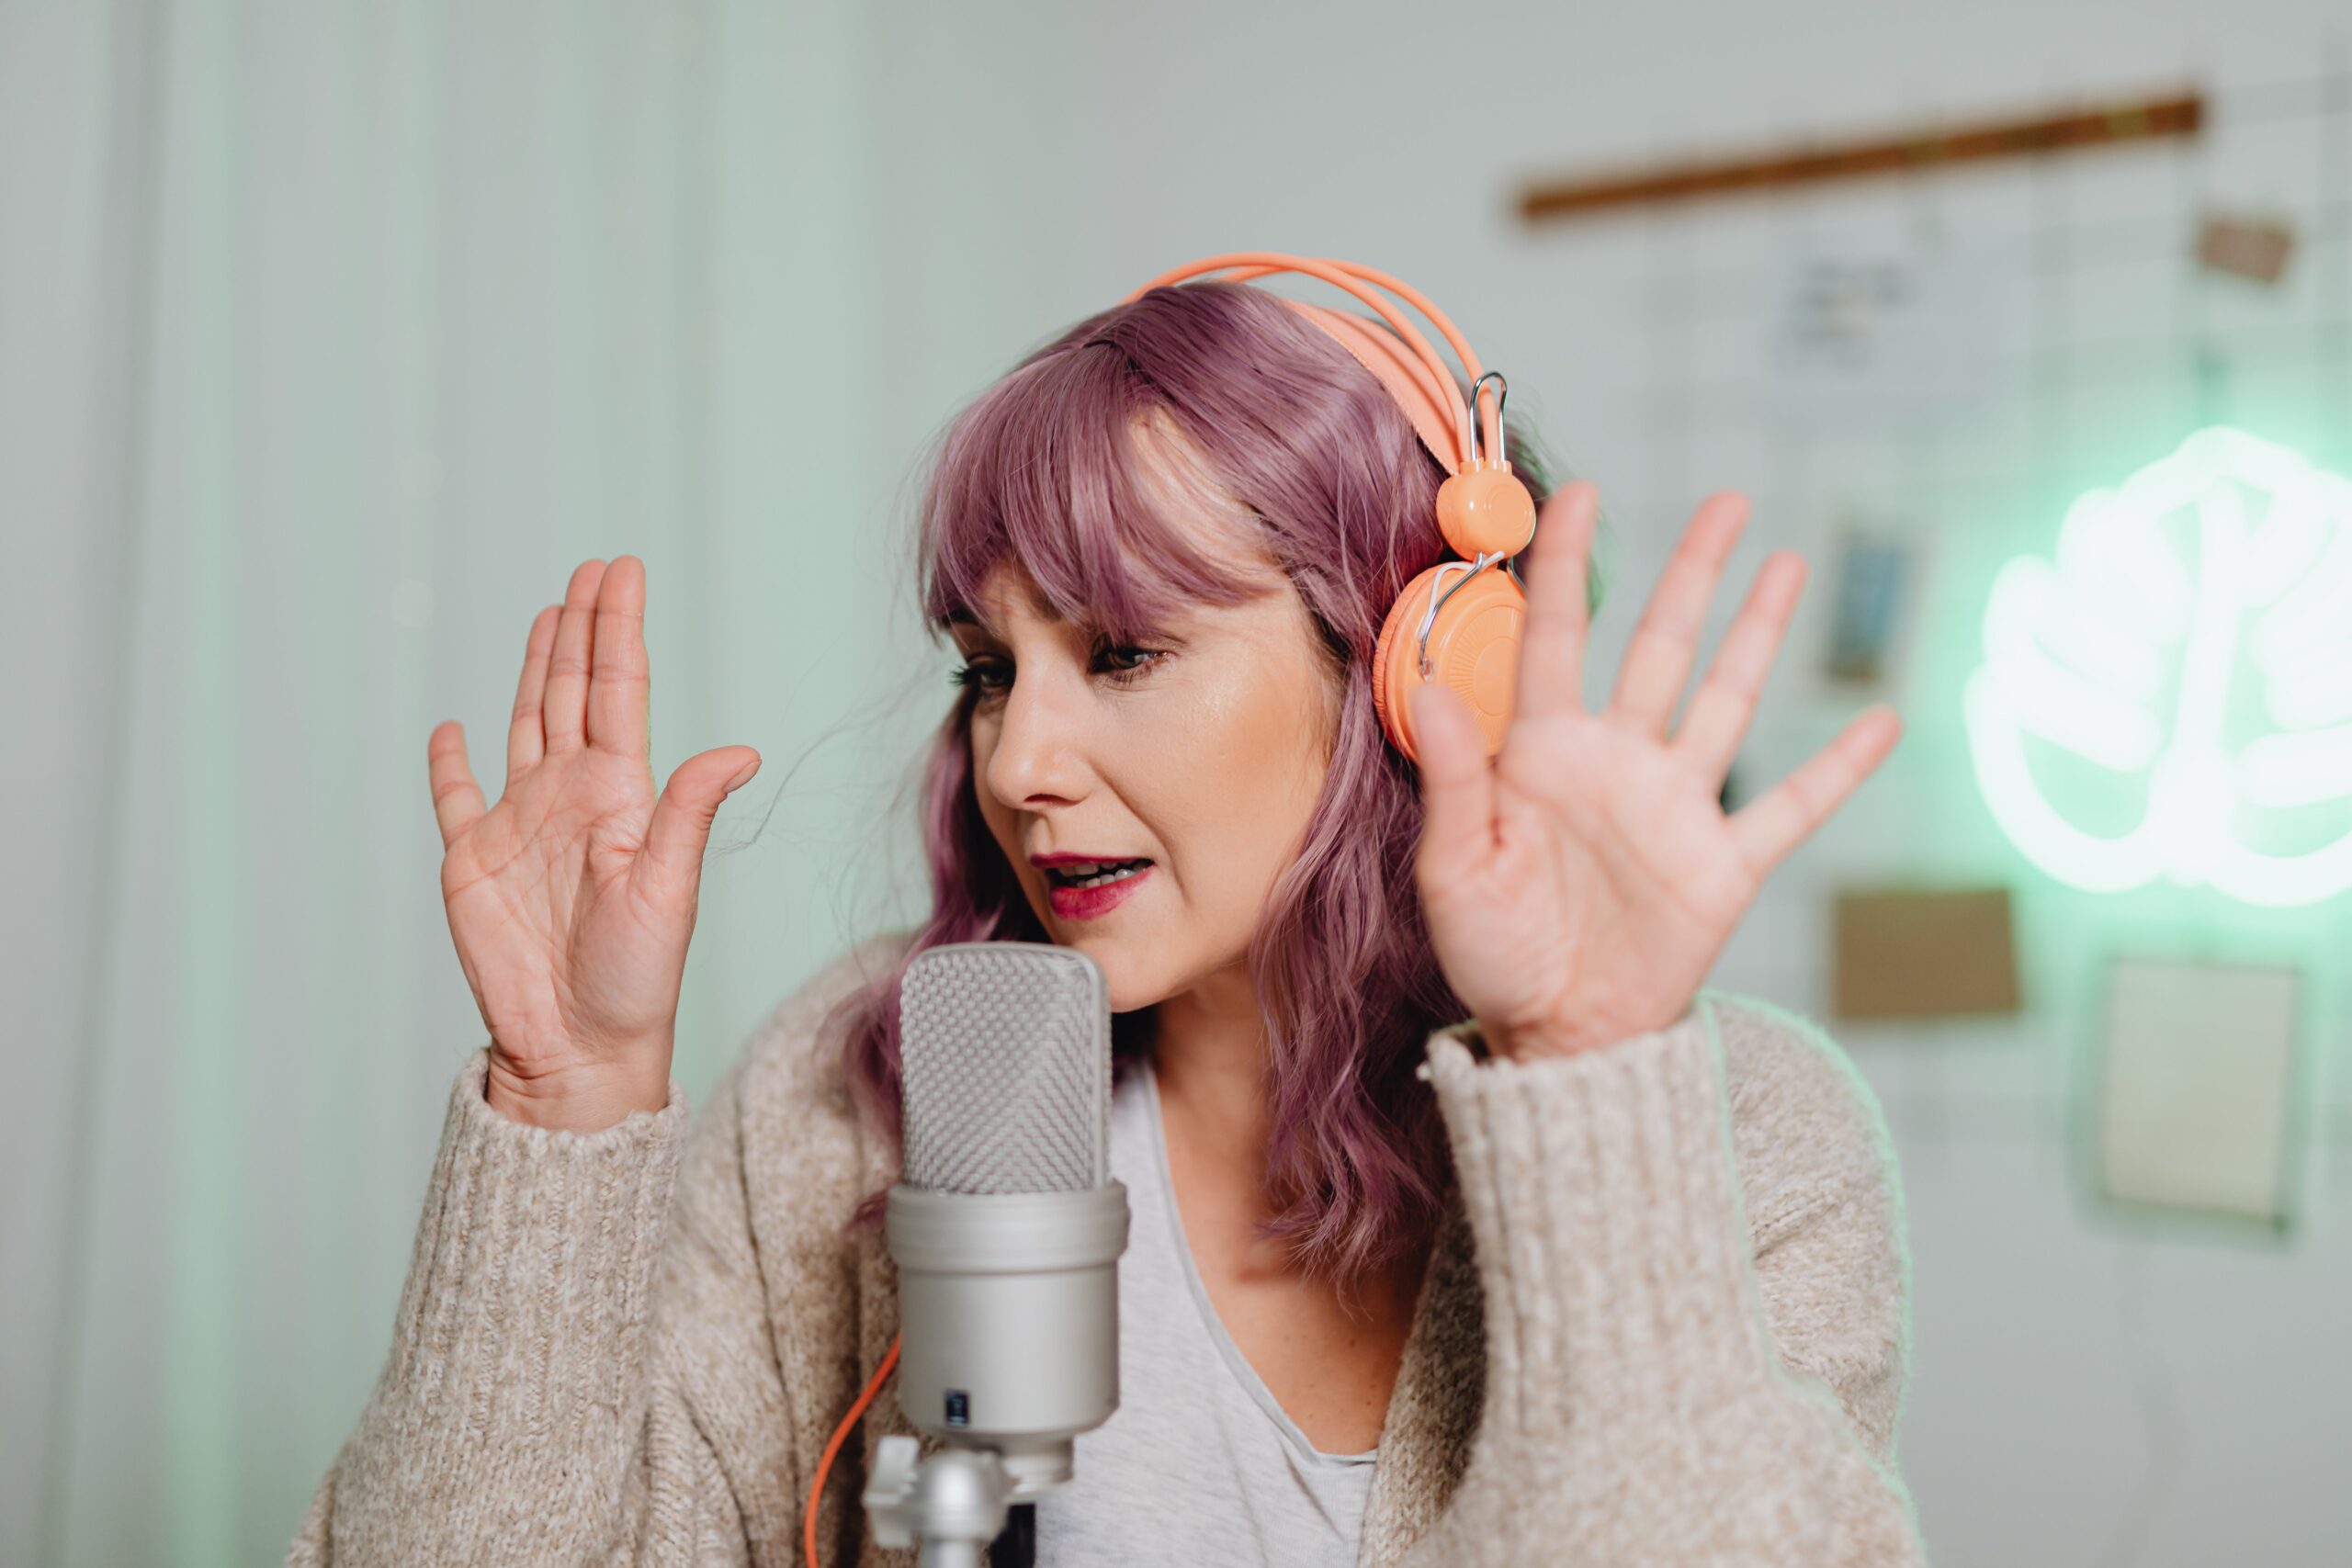 Woman with pink hair and orange headphones talking into a mic.